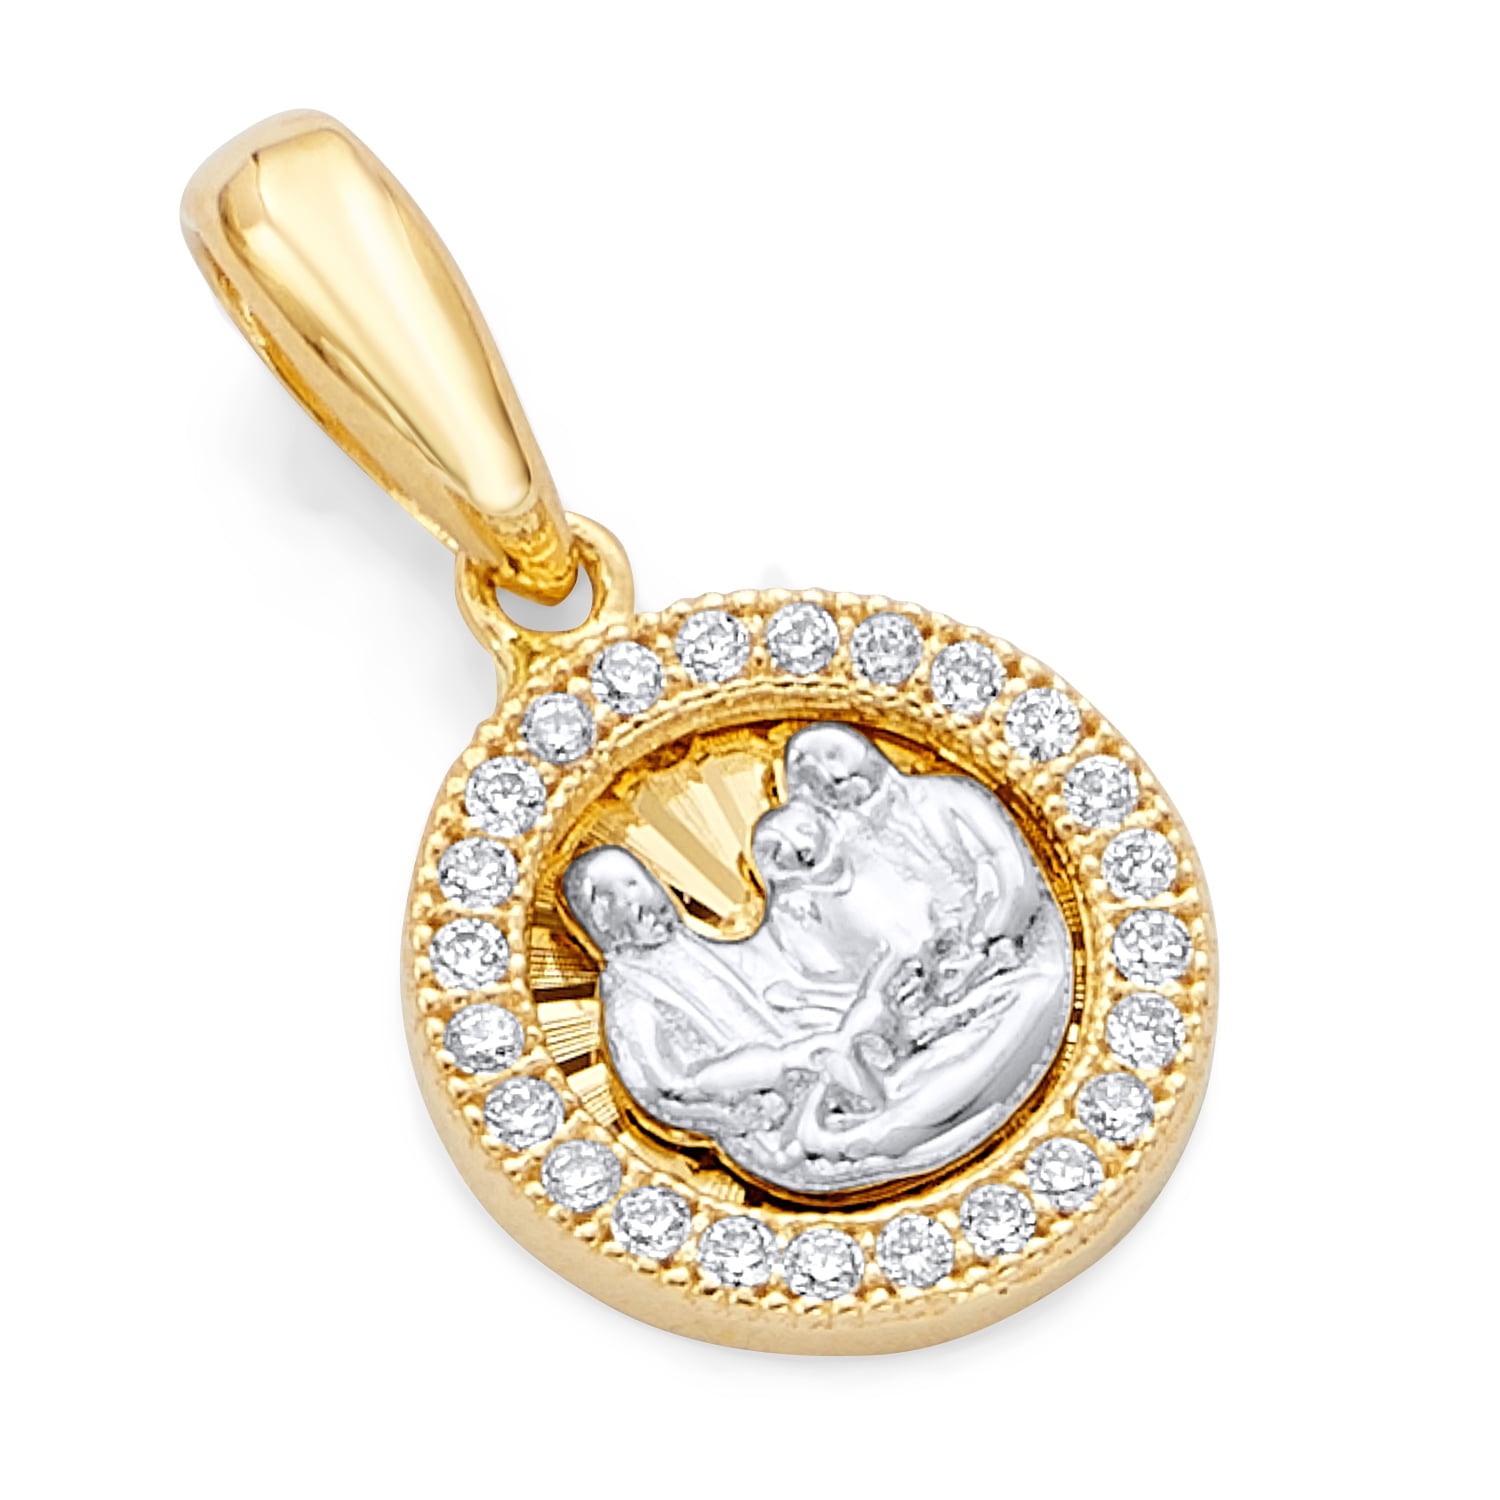 Size : 21 x 15 mm Wellingsale 14k Two 2 Tone White and Yellow Gold Baptism Pendant